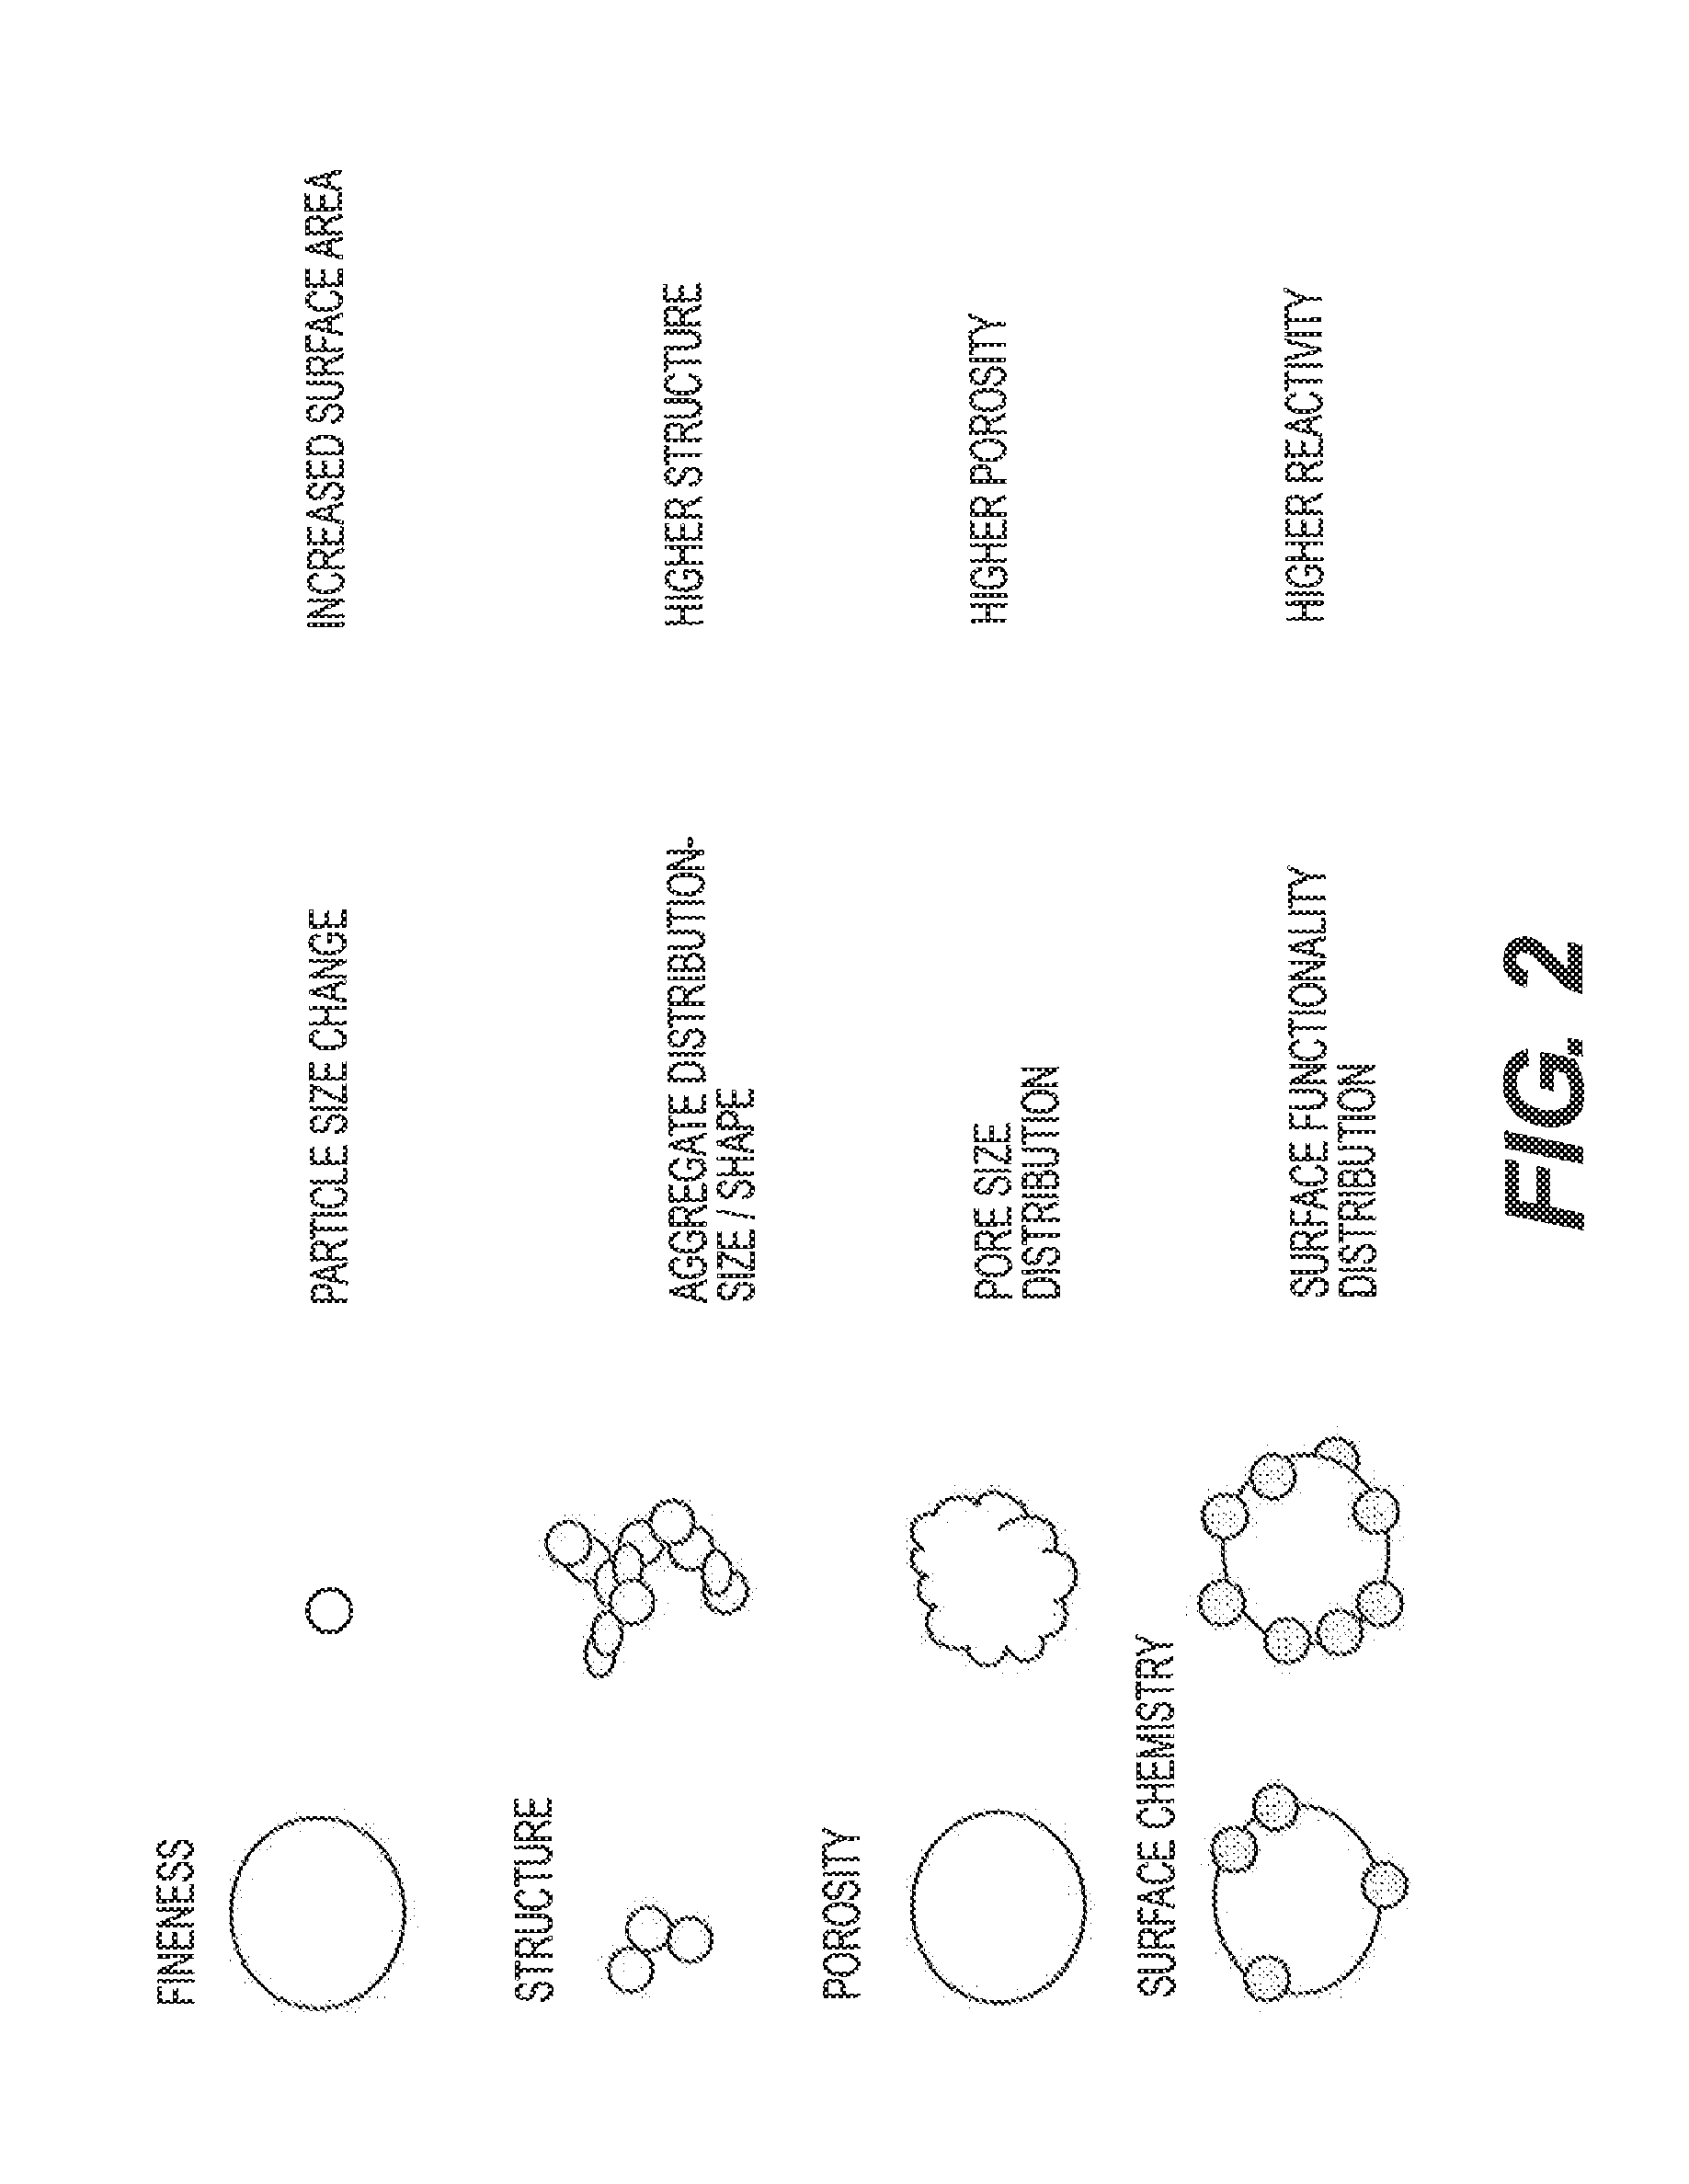 Method and apparatus for improving charge acceptance of lead-acid batteries